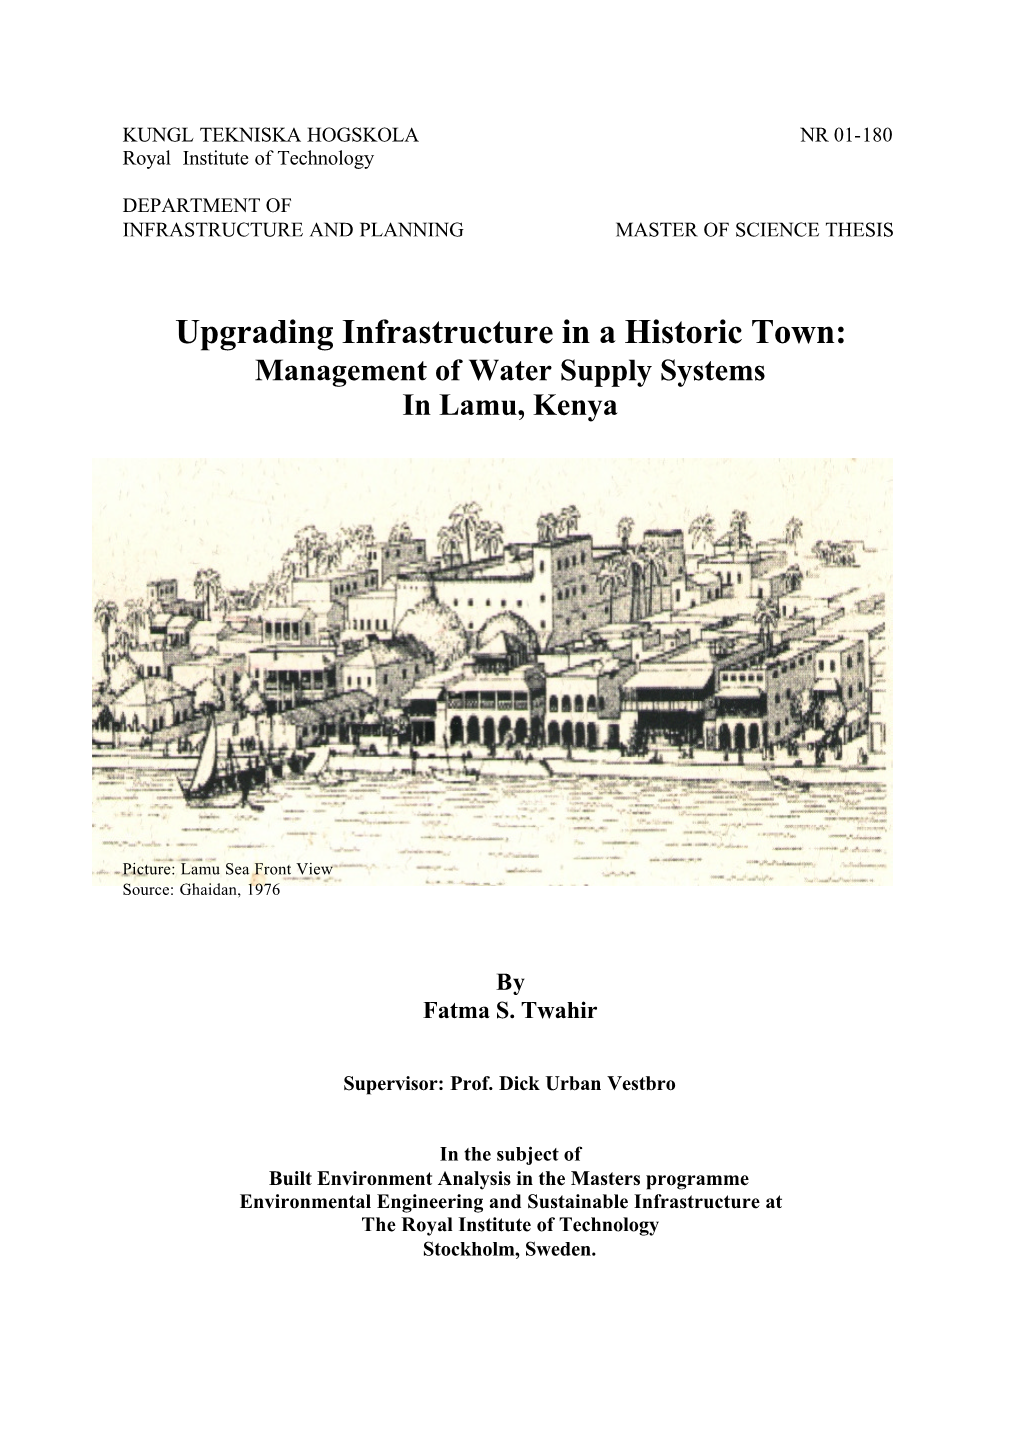 Upgrading Infrastructure in a Historic Town: Management of Water Supply Systems in Lamu, Kenya